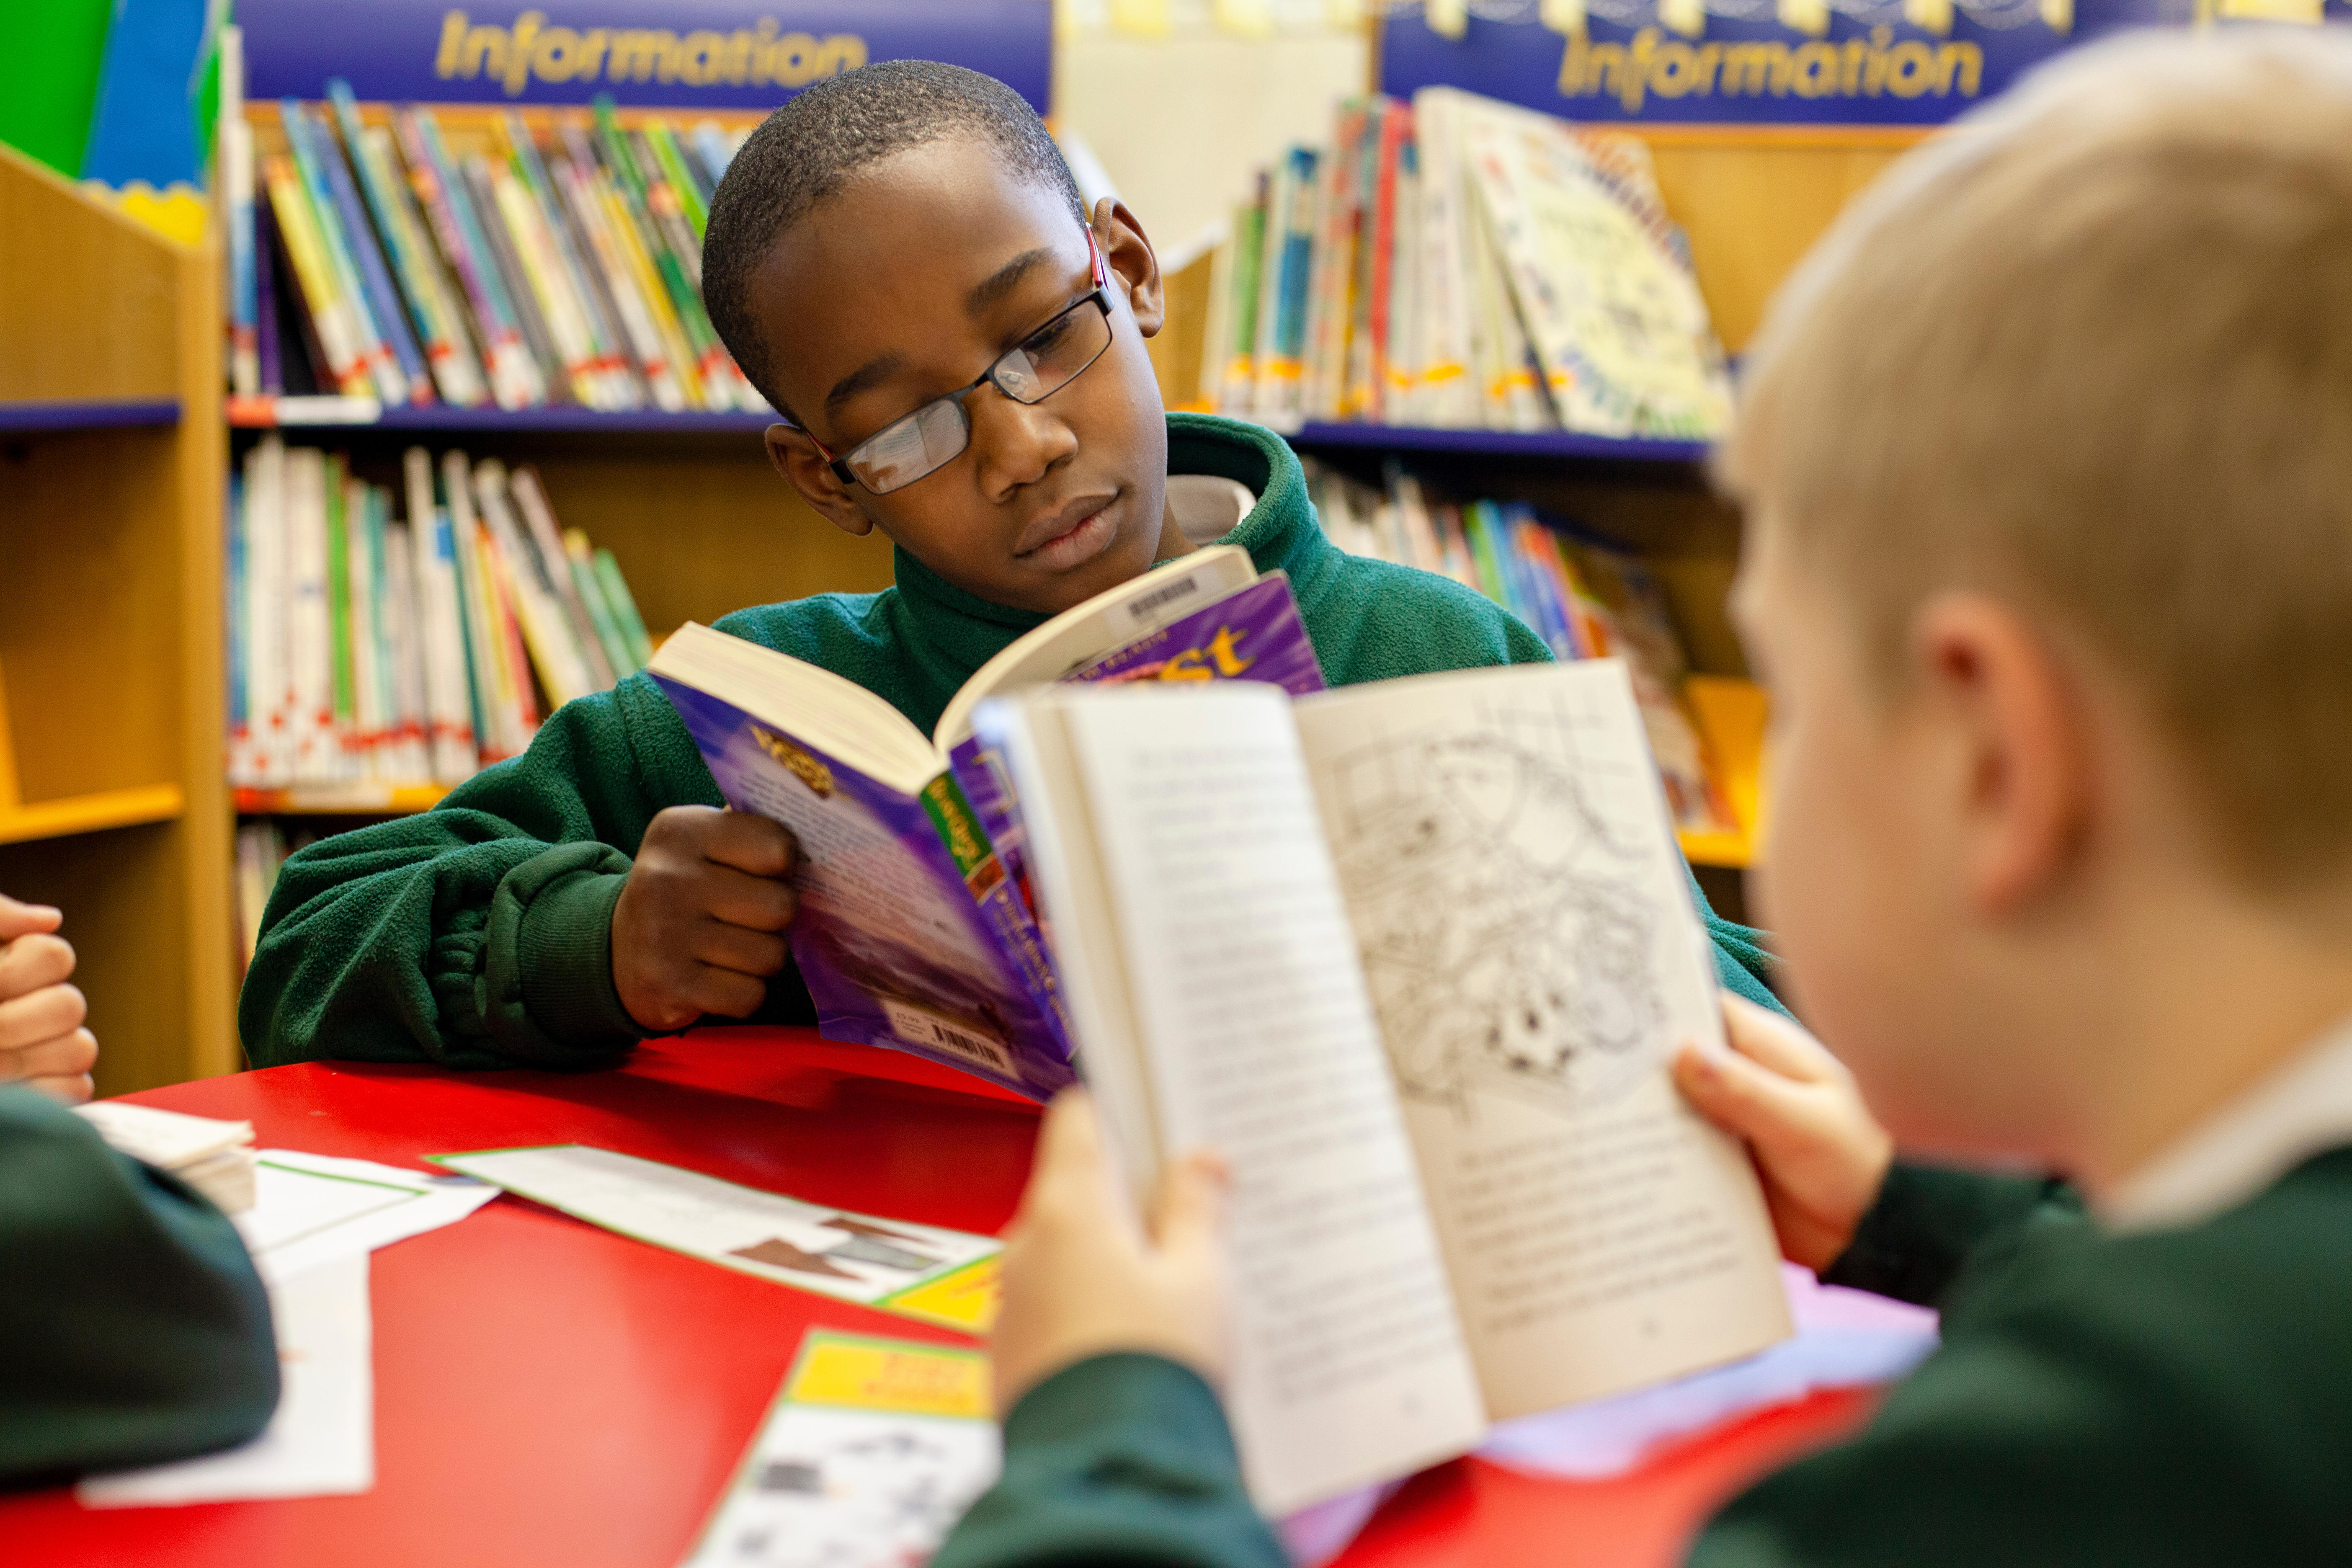 If We Want Bookworms, We Need to Get Beyond Leveled Reading | Edutopia